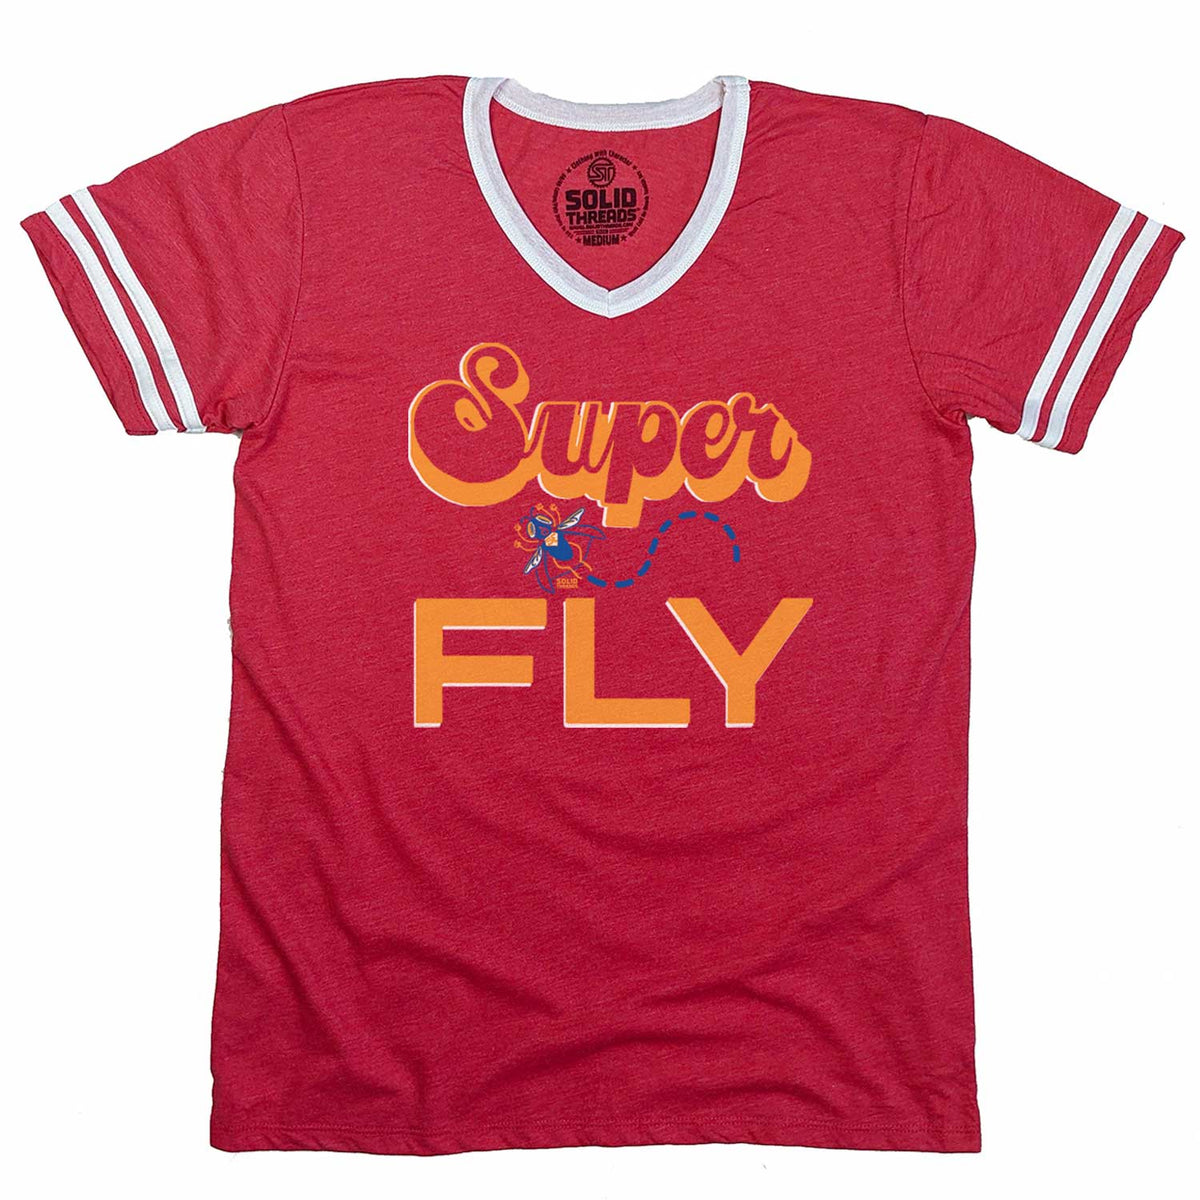 Men&#39;s Superfly Vintage Graphic V-Neck Tee | Retro Curtis Mayfield T-shirt | Solid Threads